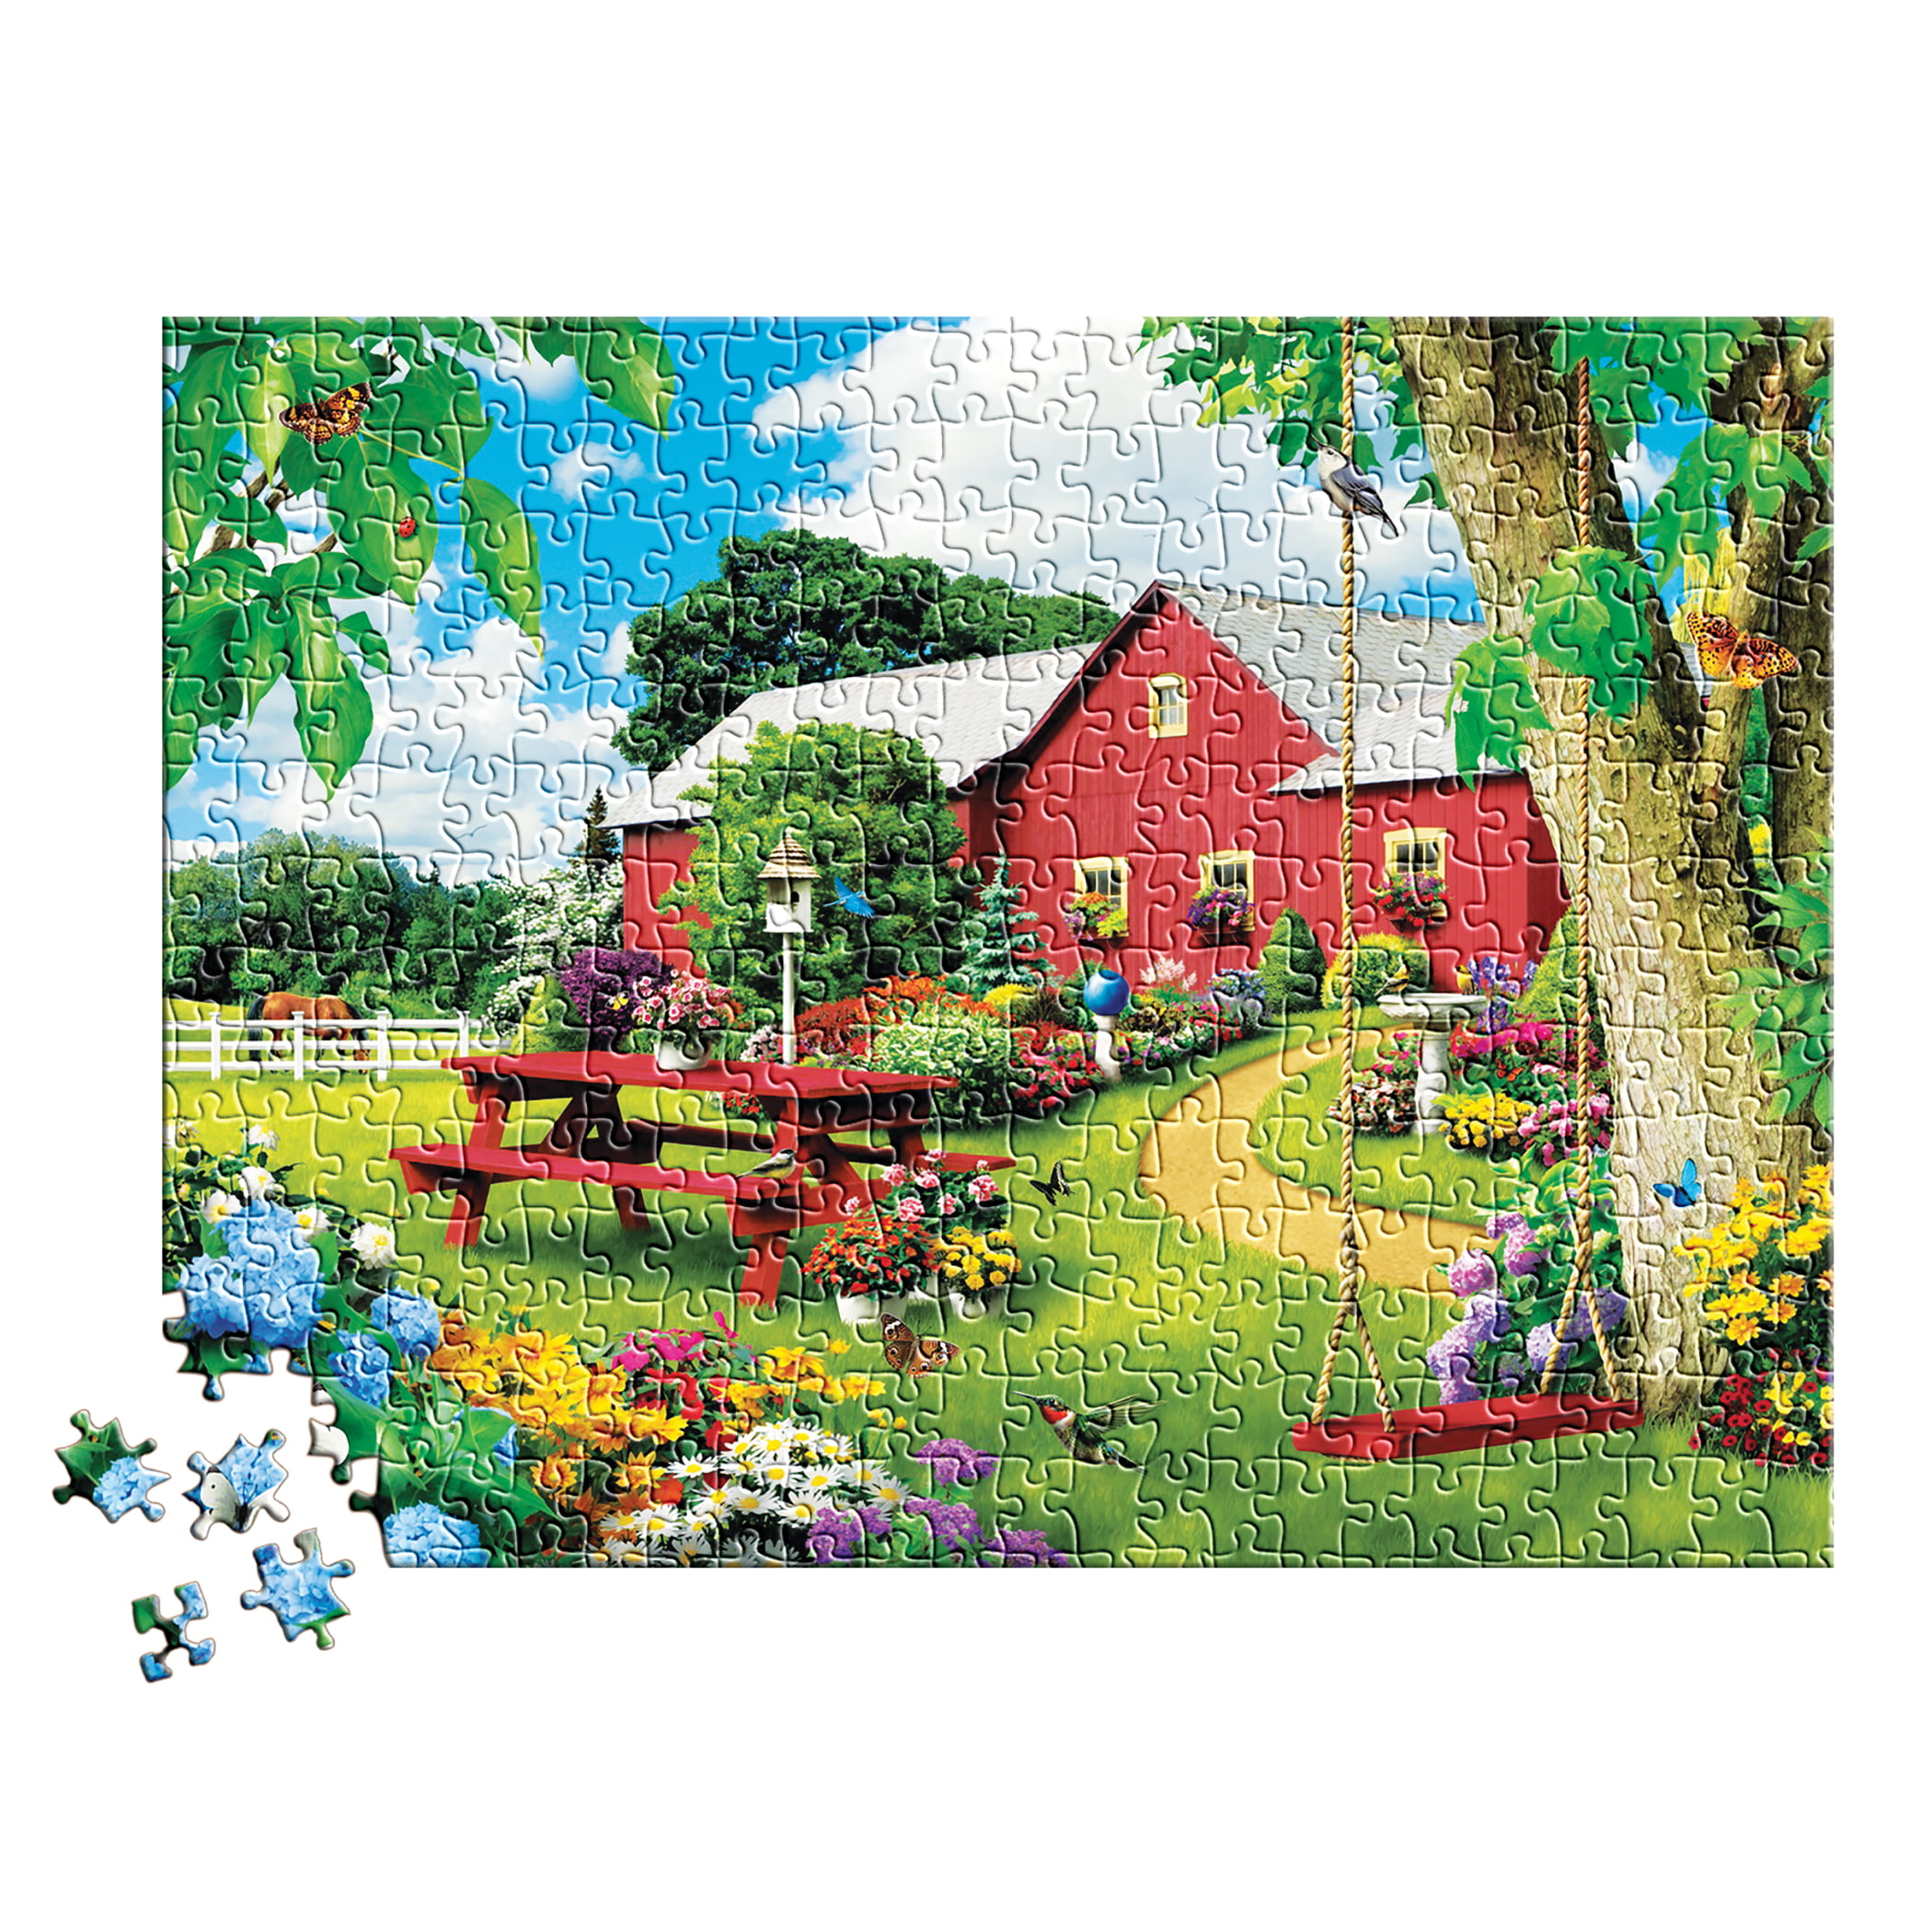 Buffalo Games Jigsaw Puzzle Nature Deer Lake 500 Pieces for sale online